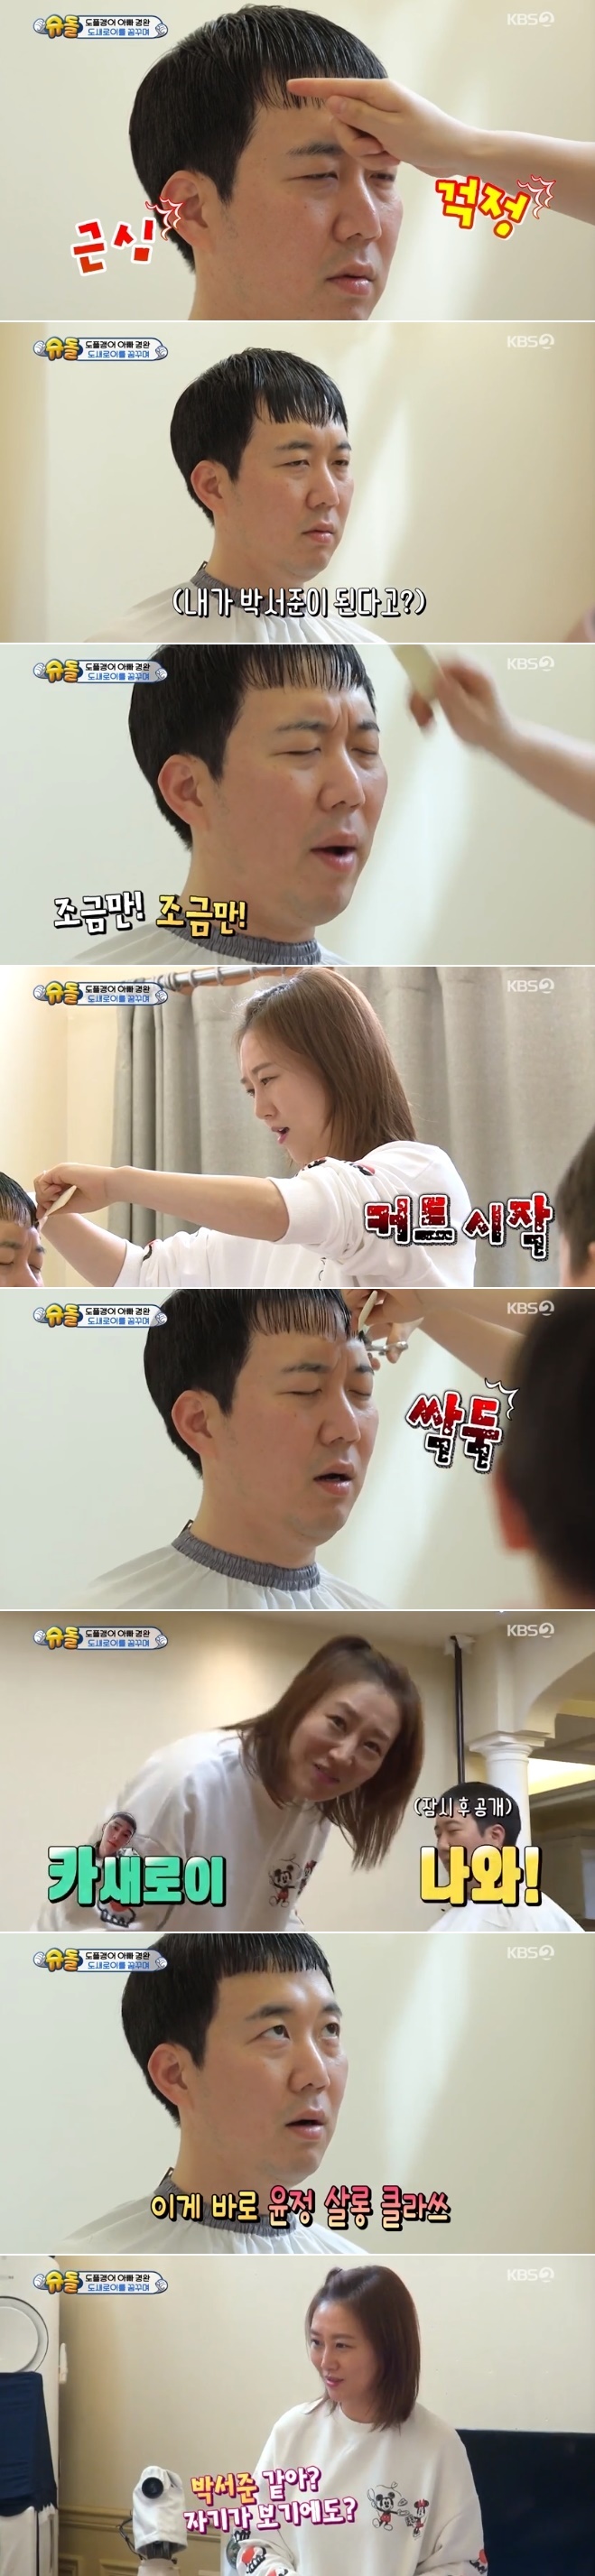 Three people were born at the end of Jang Yoon-jungs hand.On April 26, KBS 2TV Superman Returns, Jang Yoon-jung, who said he would change the Hair style of Tai Kyoung Wan, focused attention on viewers.On this day, Jang Yoon-jung saw the Hair style of Tai Kyoung Wan, who was not in order, and said, You know that you cut your hair when you were young?Tae Kyoung Wan said, I have to go to Cheongdam-dong. However, Jang Yoon-jung did not care and listened to the scissors.Jang Yoon-jung said, You know Park Sae-ro? He said he would do a hair style of Park Seo-joon in the popular drama Itaewon Clath.Tai Kyong Wan exclaimed a little (cut) in a stretch.When Tae Kyoung Wan, who is so worried, said, Hey! Jang Yoon-jung said, Ya?, and the momentum of the moment was broken, and Tae Kyoung Wan said, Oh, my sister and laughed at the audience.Jang Yoon-jung, who saw the result of the scissors, expressed satisfaction to Tae Kyoung Wan, saying, Park Seo-joon, please sign.Seeing the results, Tae Kyoung Wan said, Get the mirror, not the Park Seo-joon photo.As Tae Kyoung Wans hair change succeeded, Jang Yoon-jung, who gained confidence, decided to give the hairstyle style of Yeonwoo and Ha Young in a style of hair style.So, the three Doseiroi doppelgangers were able to bring a smile to the same Hair style.On the other hand, Son Hyun-joo, who had been in the Doppelganger House for 17 years with Jang Yoon-jung, visited the house and attracted attention.Son Hyun-joo said, I have been a beggar in the music video of Oh, my God.pear hyo-ju